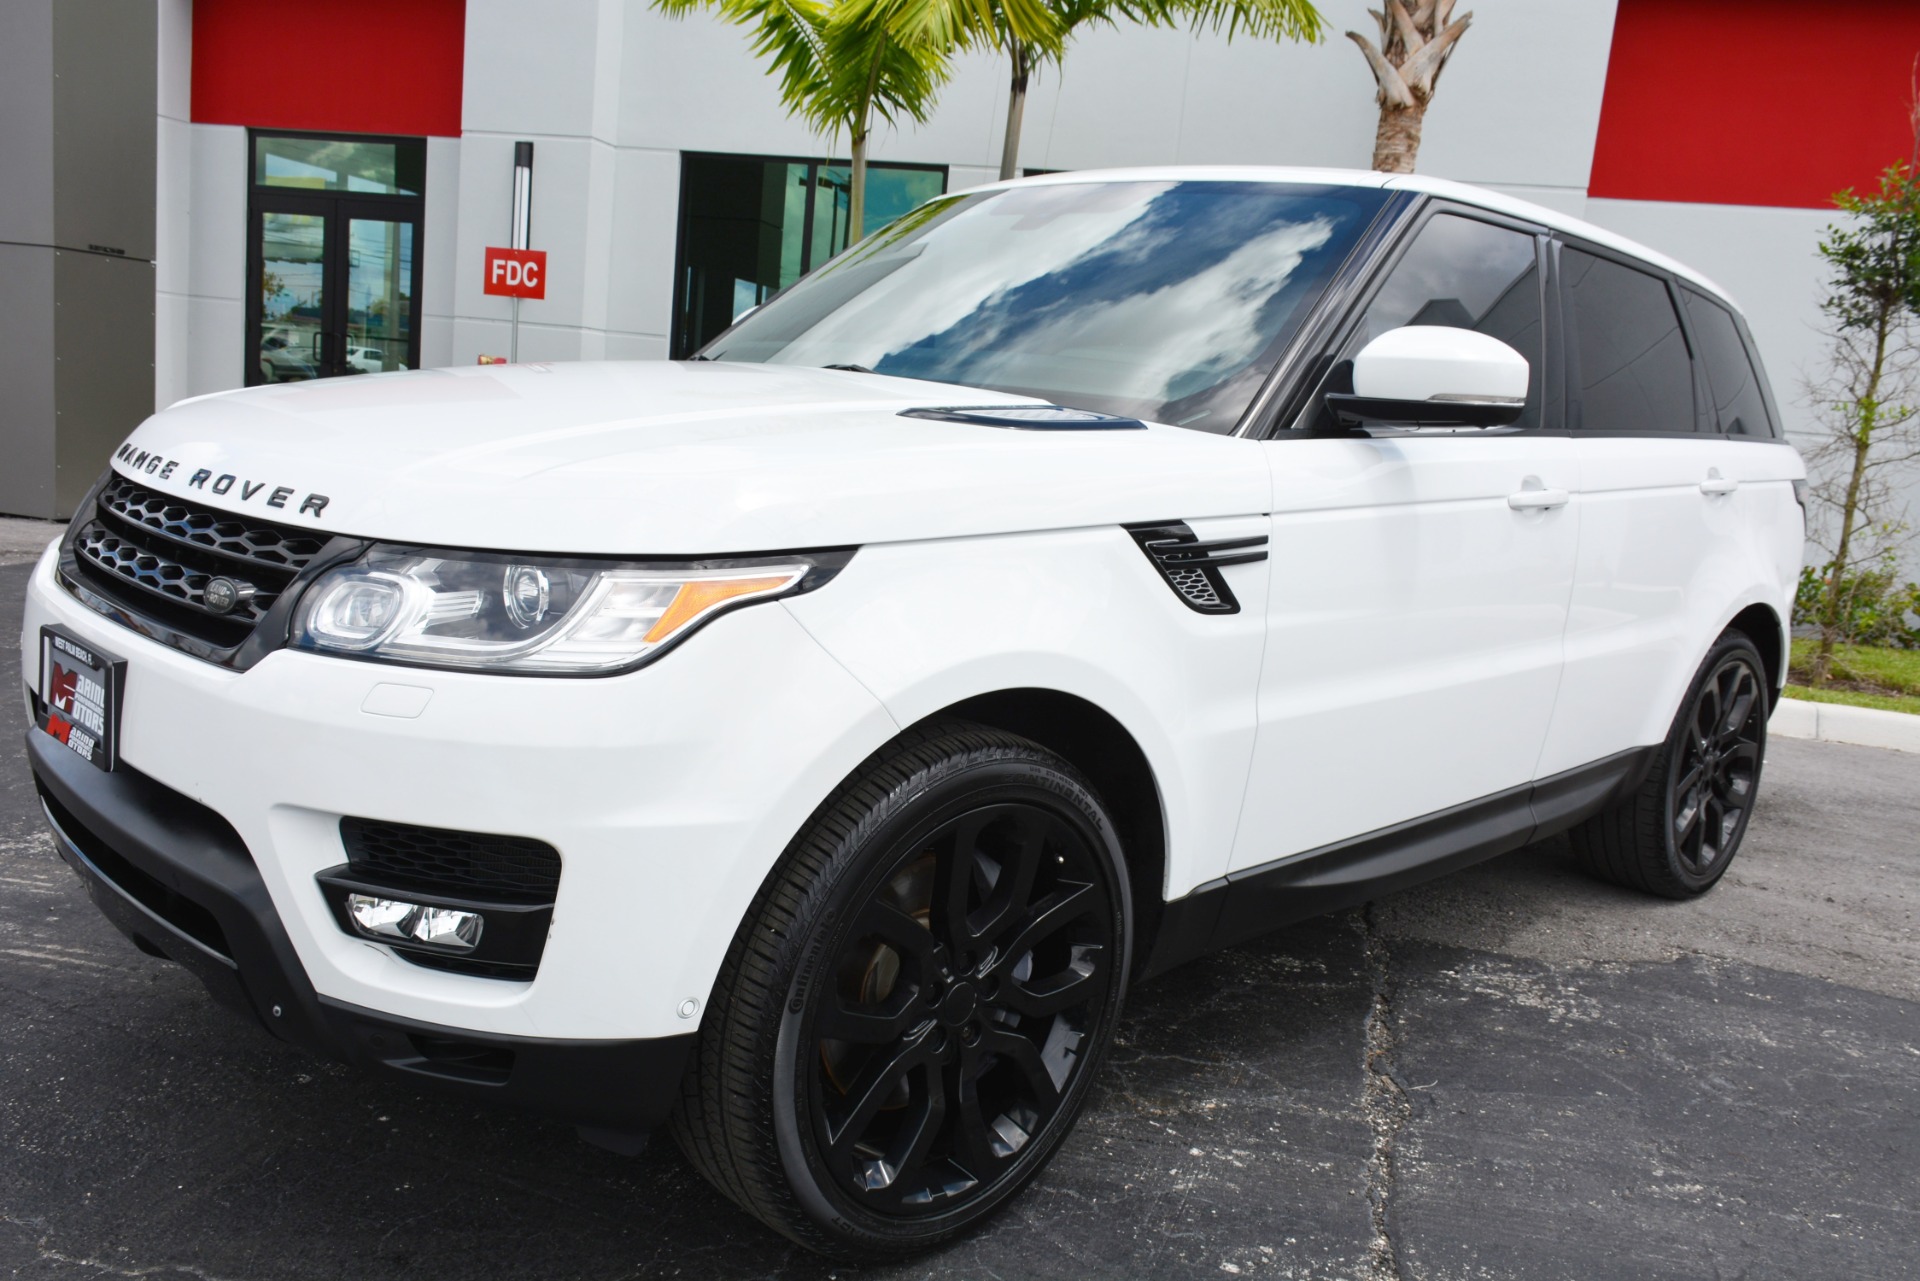 Used Land Rover Range Rover Sport For Sale ($52,900) | Marino Performance Motors Stock #386087